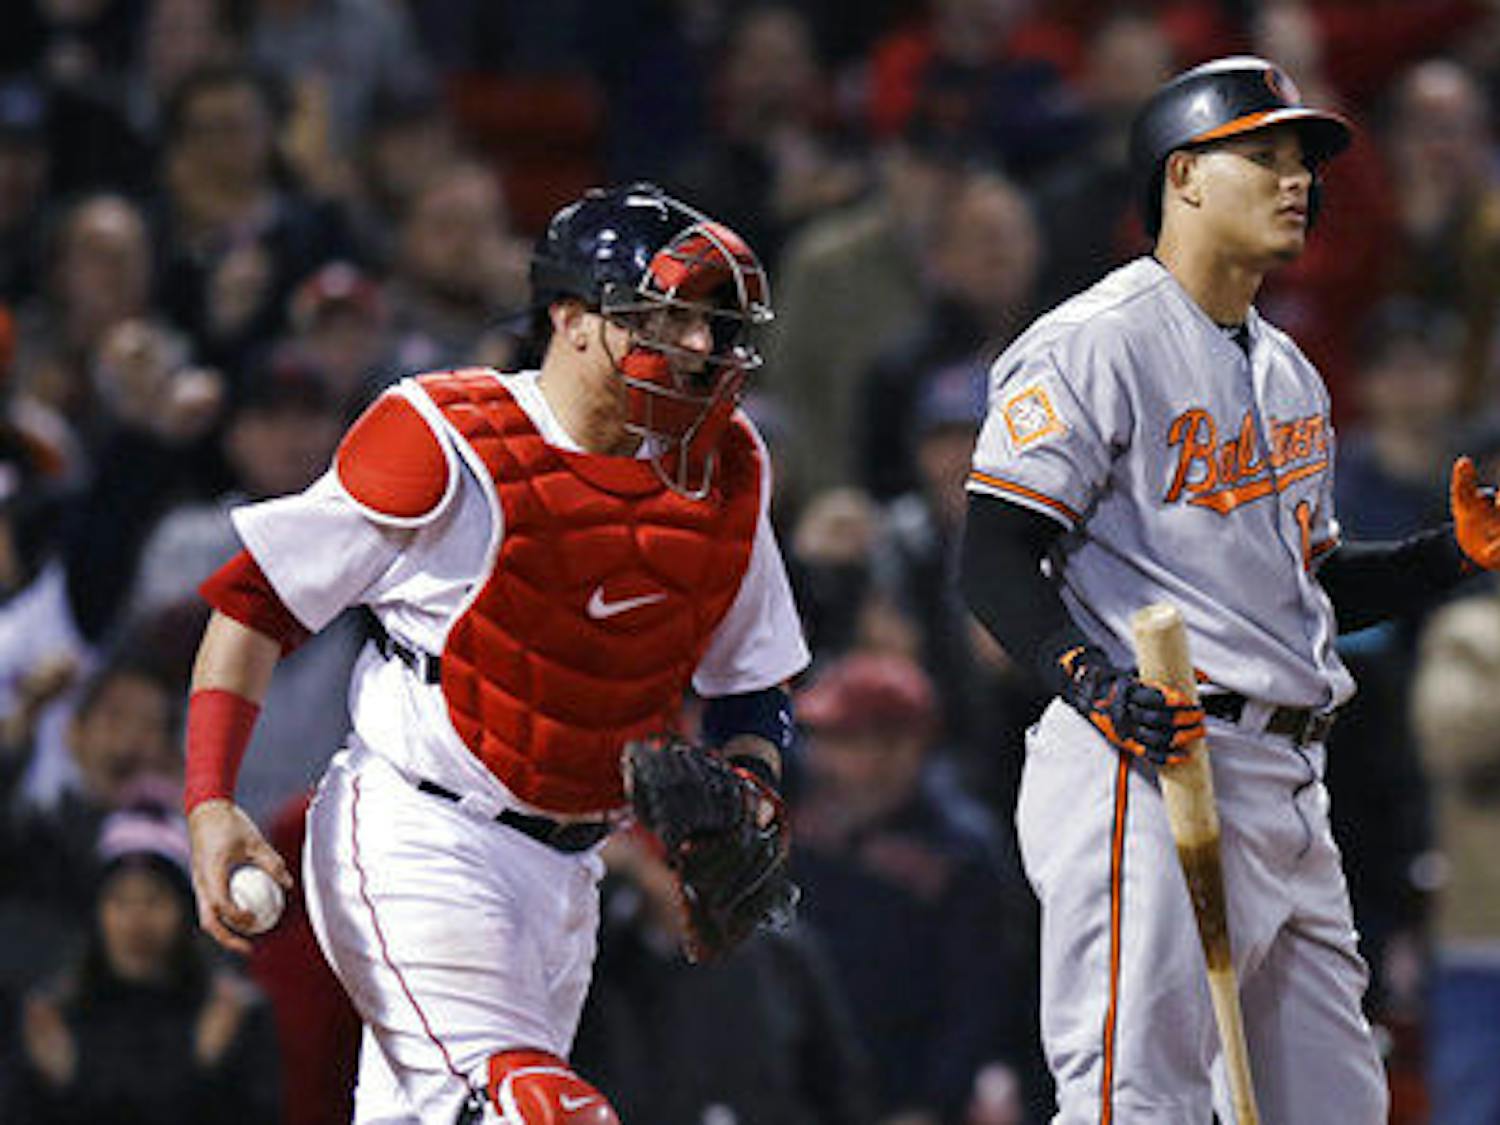 Baltimore Orioles third baseman Manny Machado reacts after striking out during Wednesday's 4-2 loss to the Boston Red Sox.